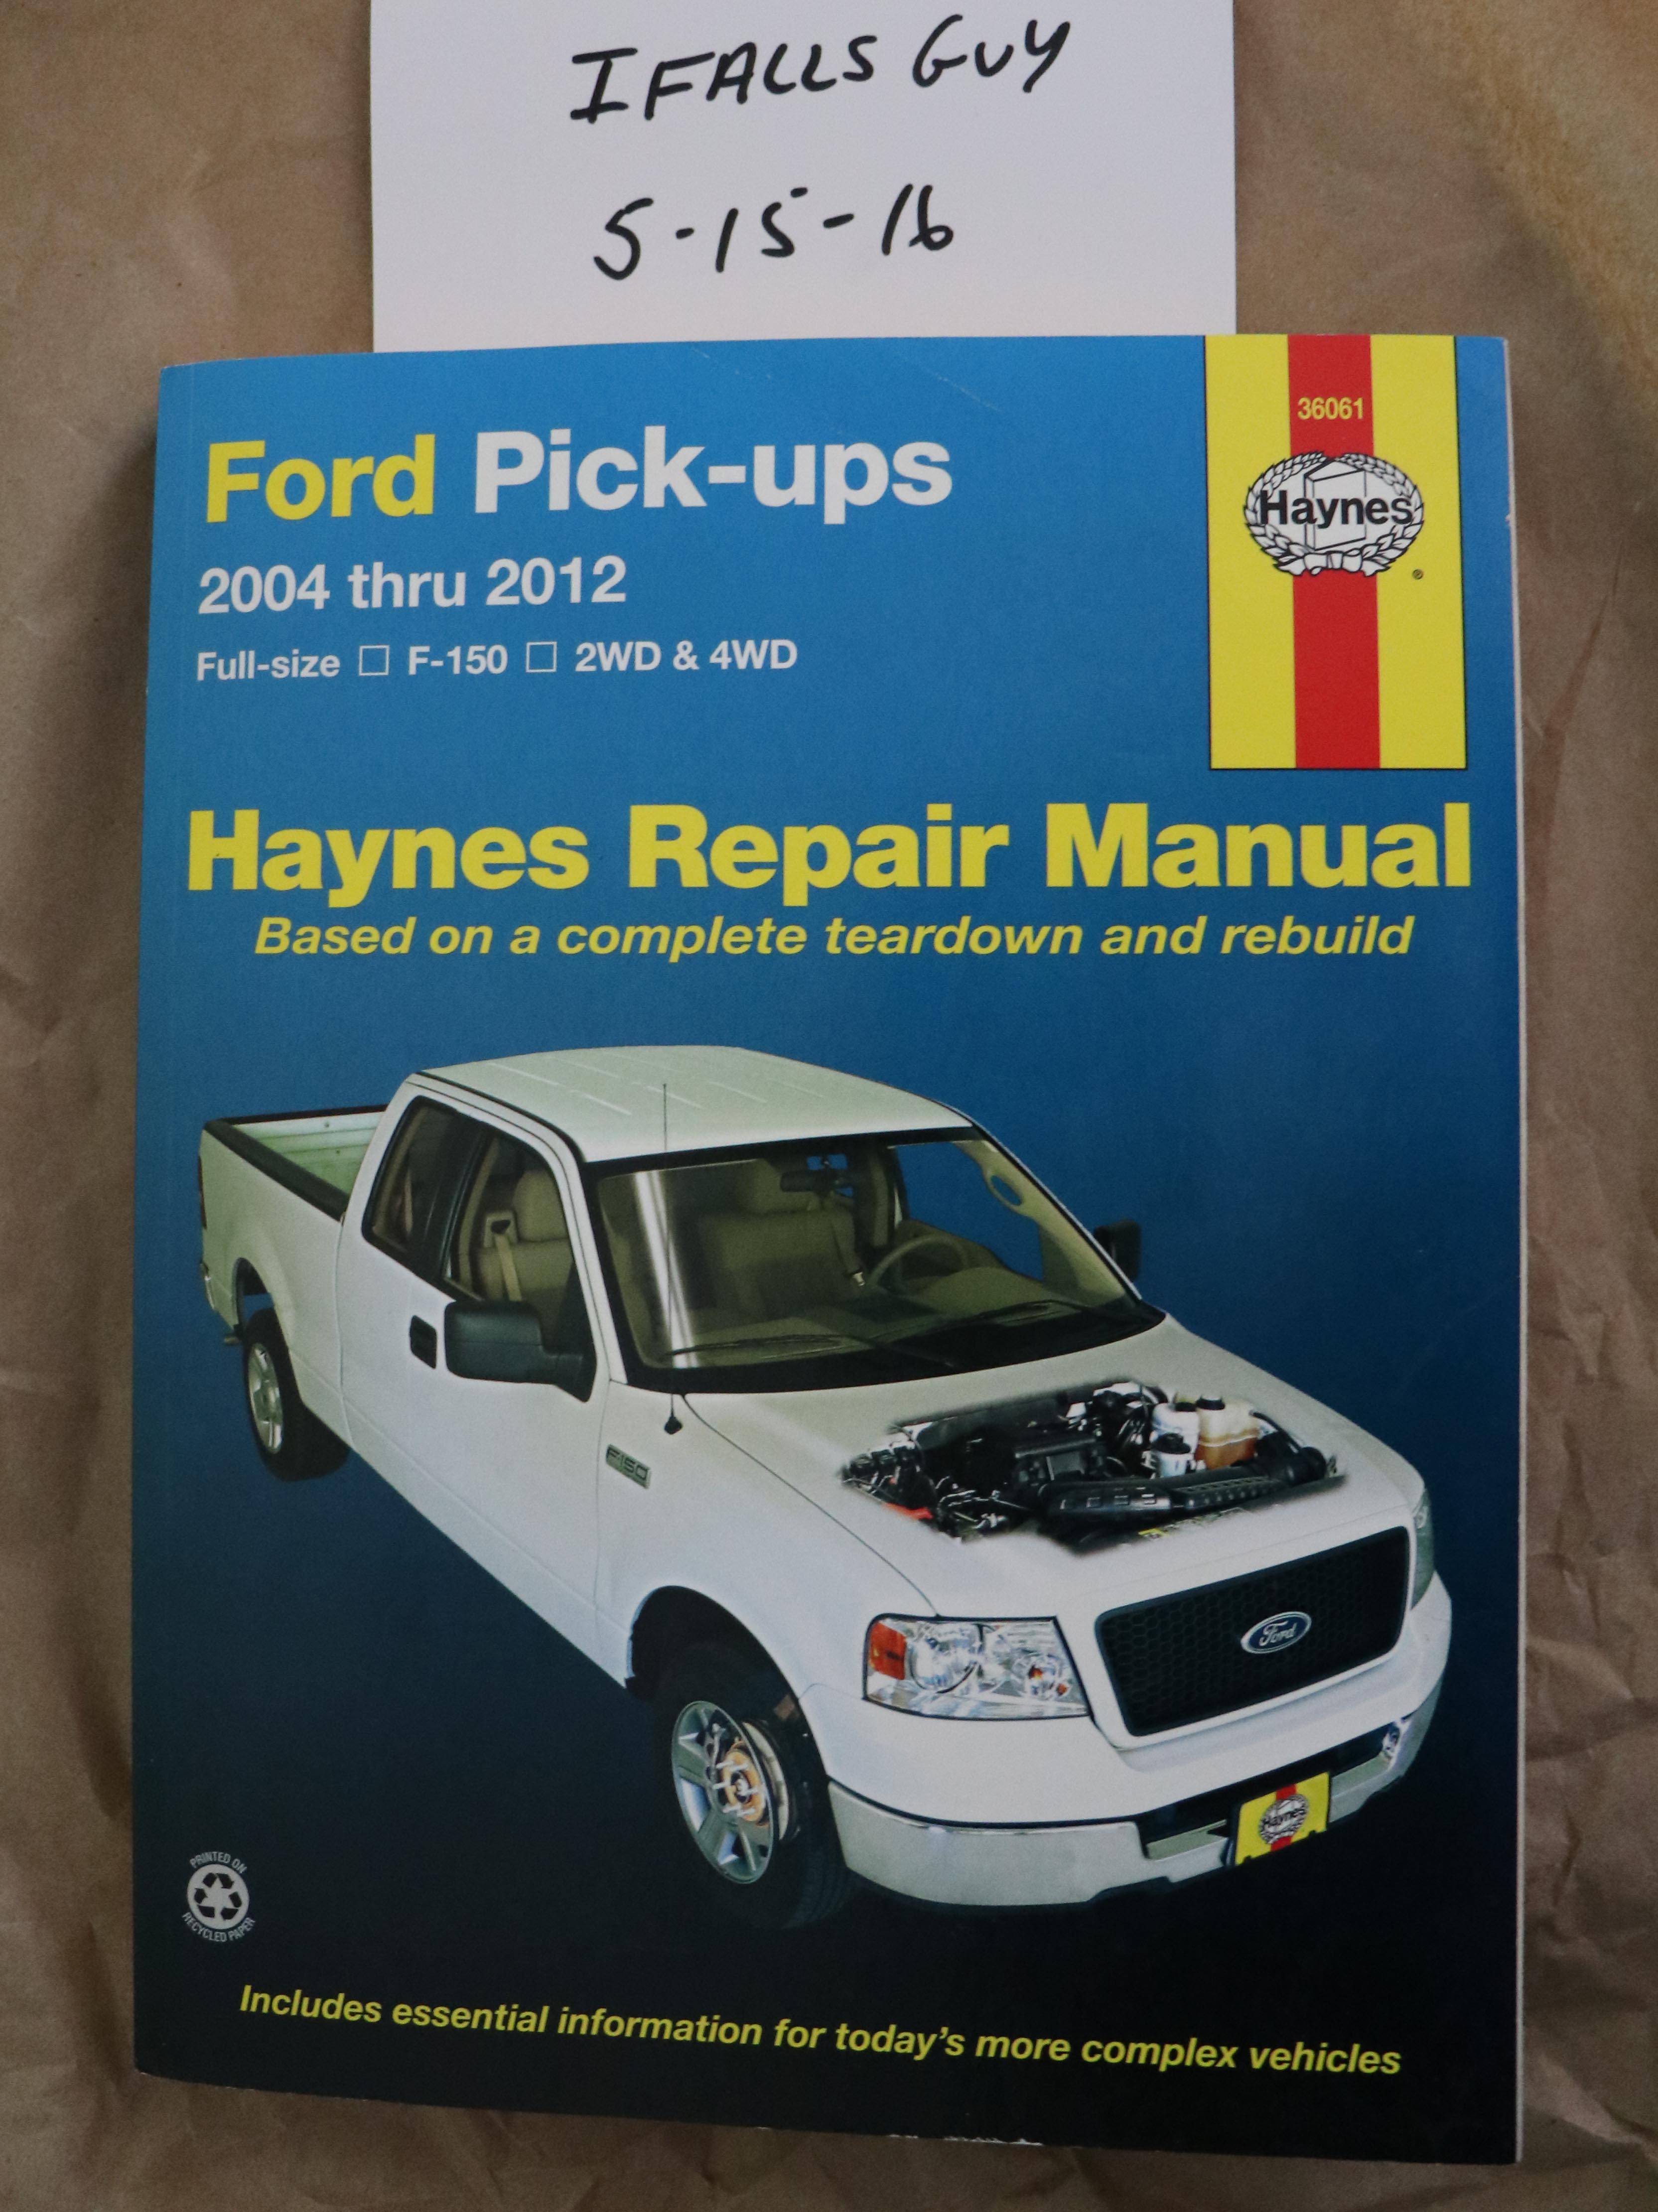 Southeast Haynes and Chilton Manuals - Ford F150 Forum - Community of